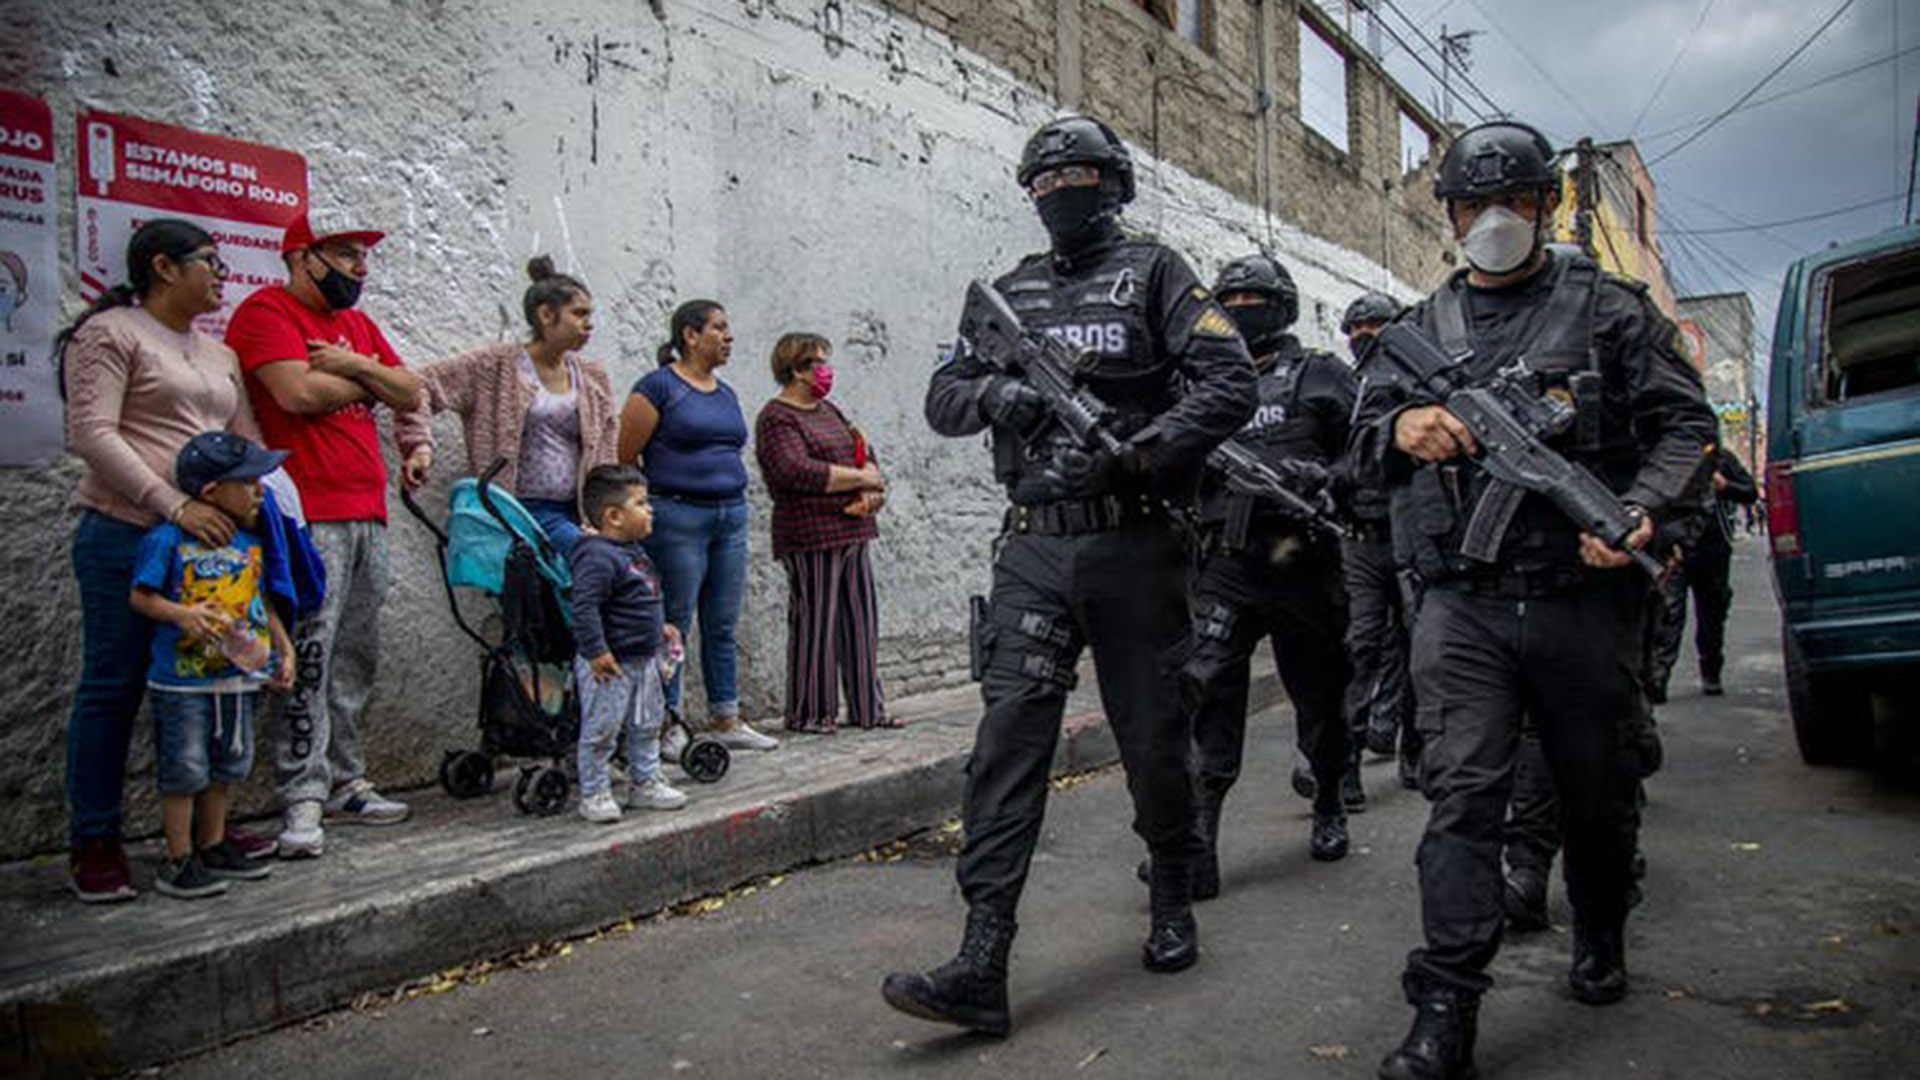 Heavily armed police in Mexico. Getty Images